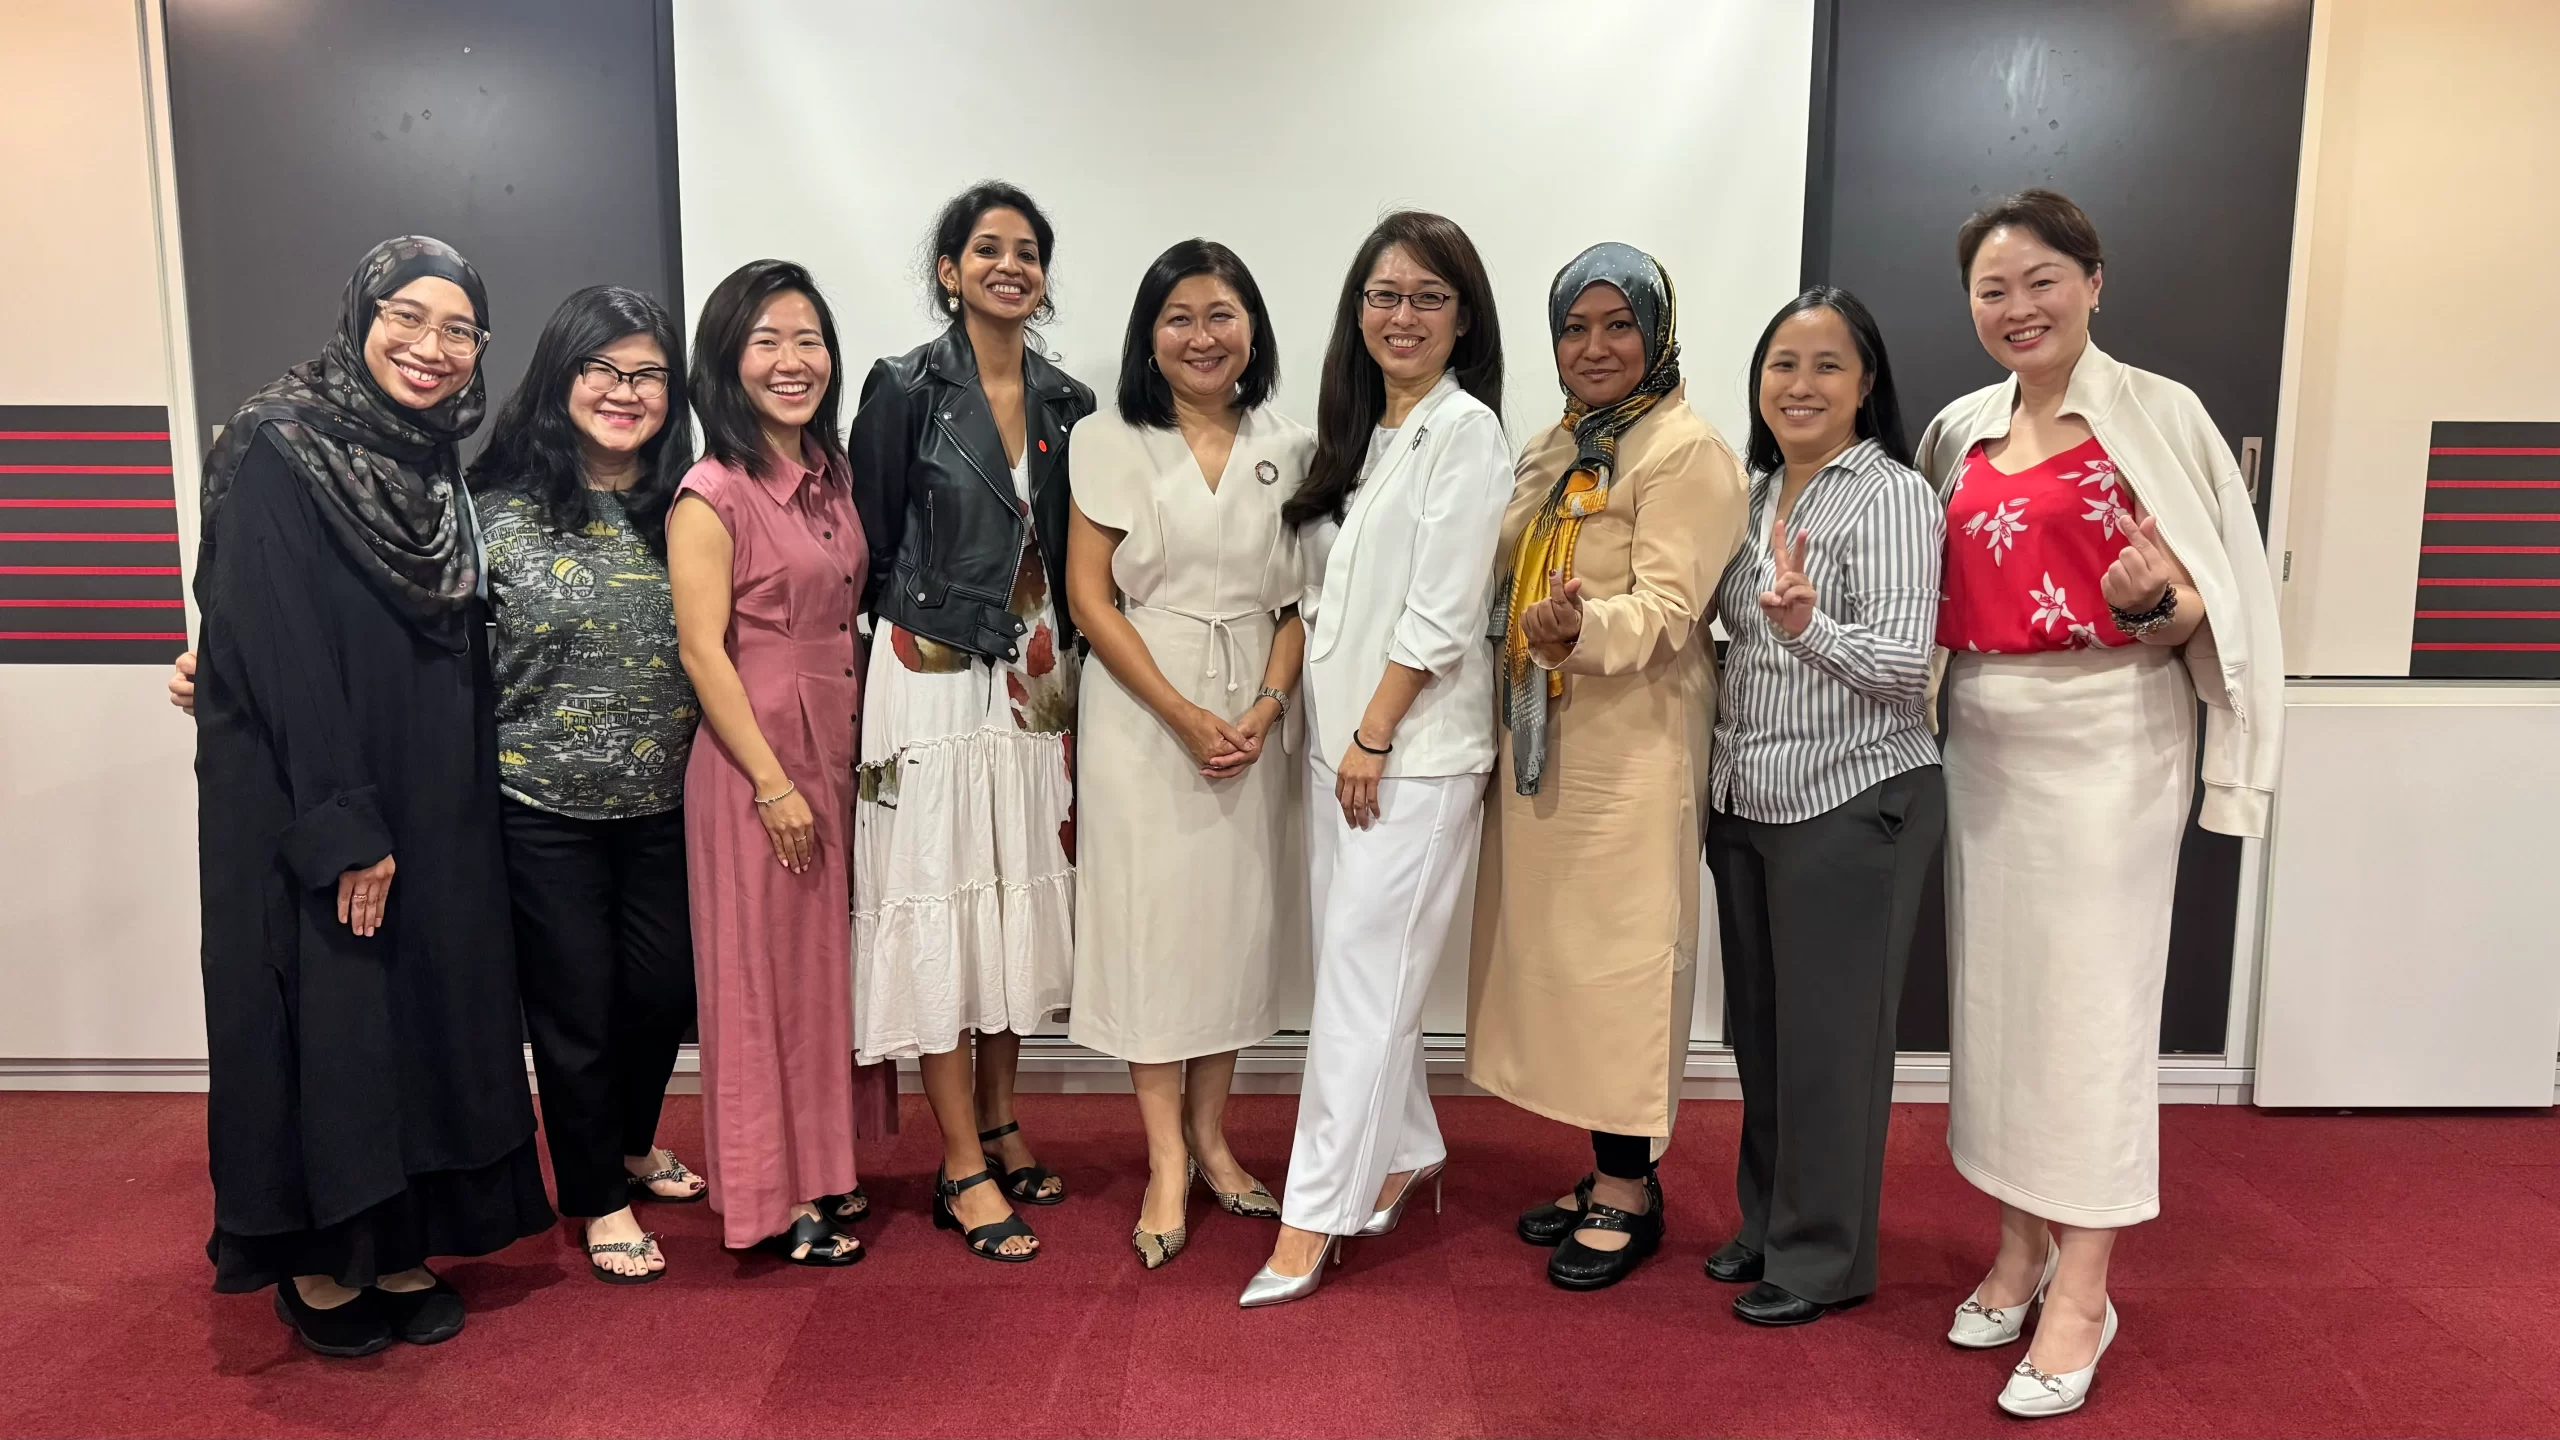 From Left to Right: Ms Liyana Sinwan, Ms Ong Soh Chin, Ms Kelley Wong, Ms Mrinalini Venkatachalam, Ms Junie Foo (Immediate Past President), Dr Seow Yian San, Mdm Noorfarahin Ahmad, Ms Bay Teck Cheng, Ms Diana Pang. Missing from photo: Ms Grishma Kewada, Dr June Goh and Ms Paige Parker.